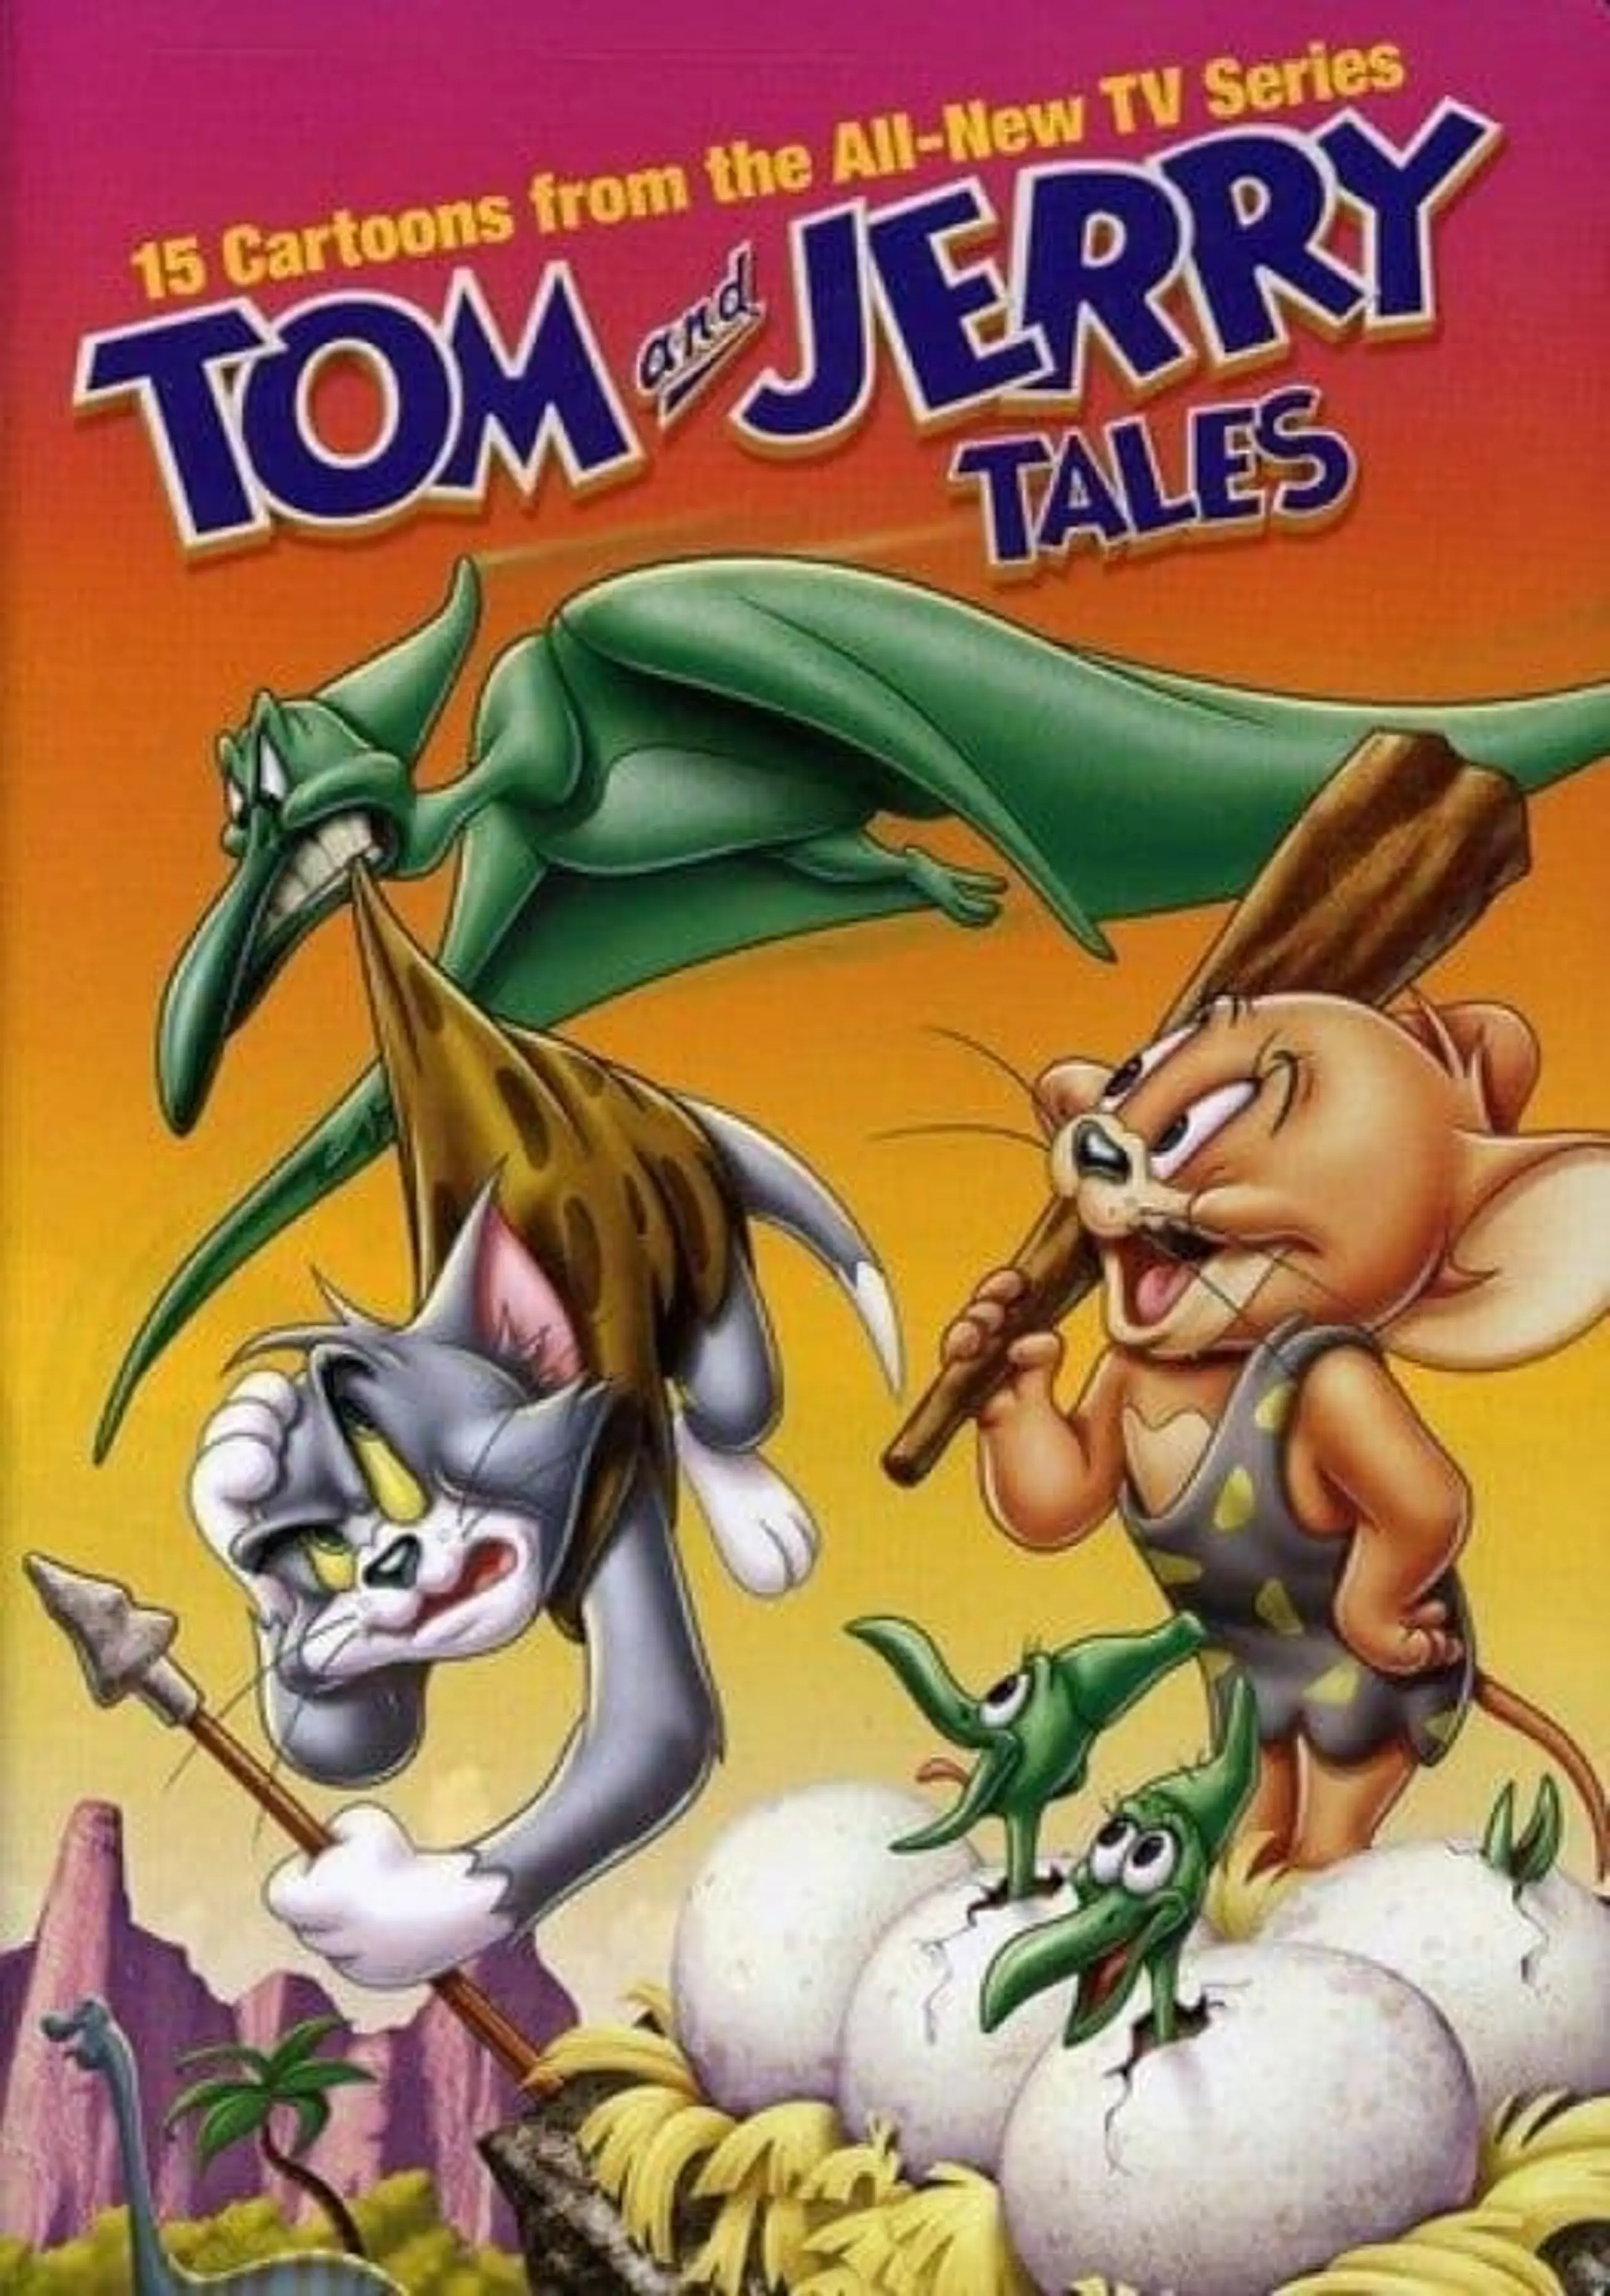 Tom and Jerry Tales, Vol. 3